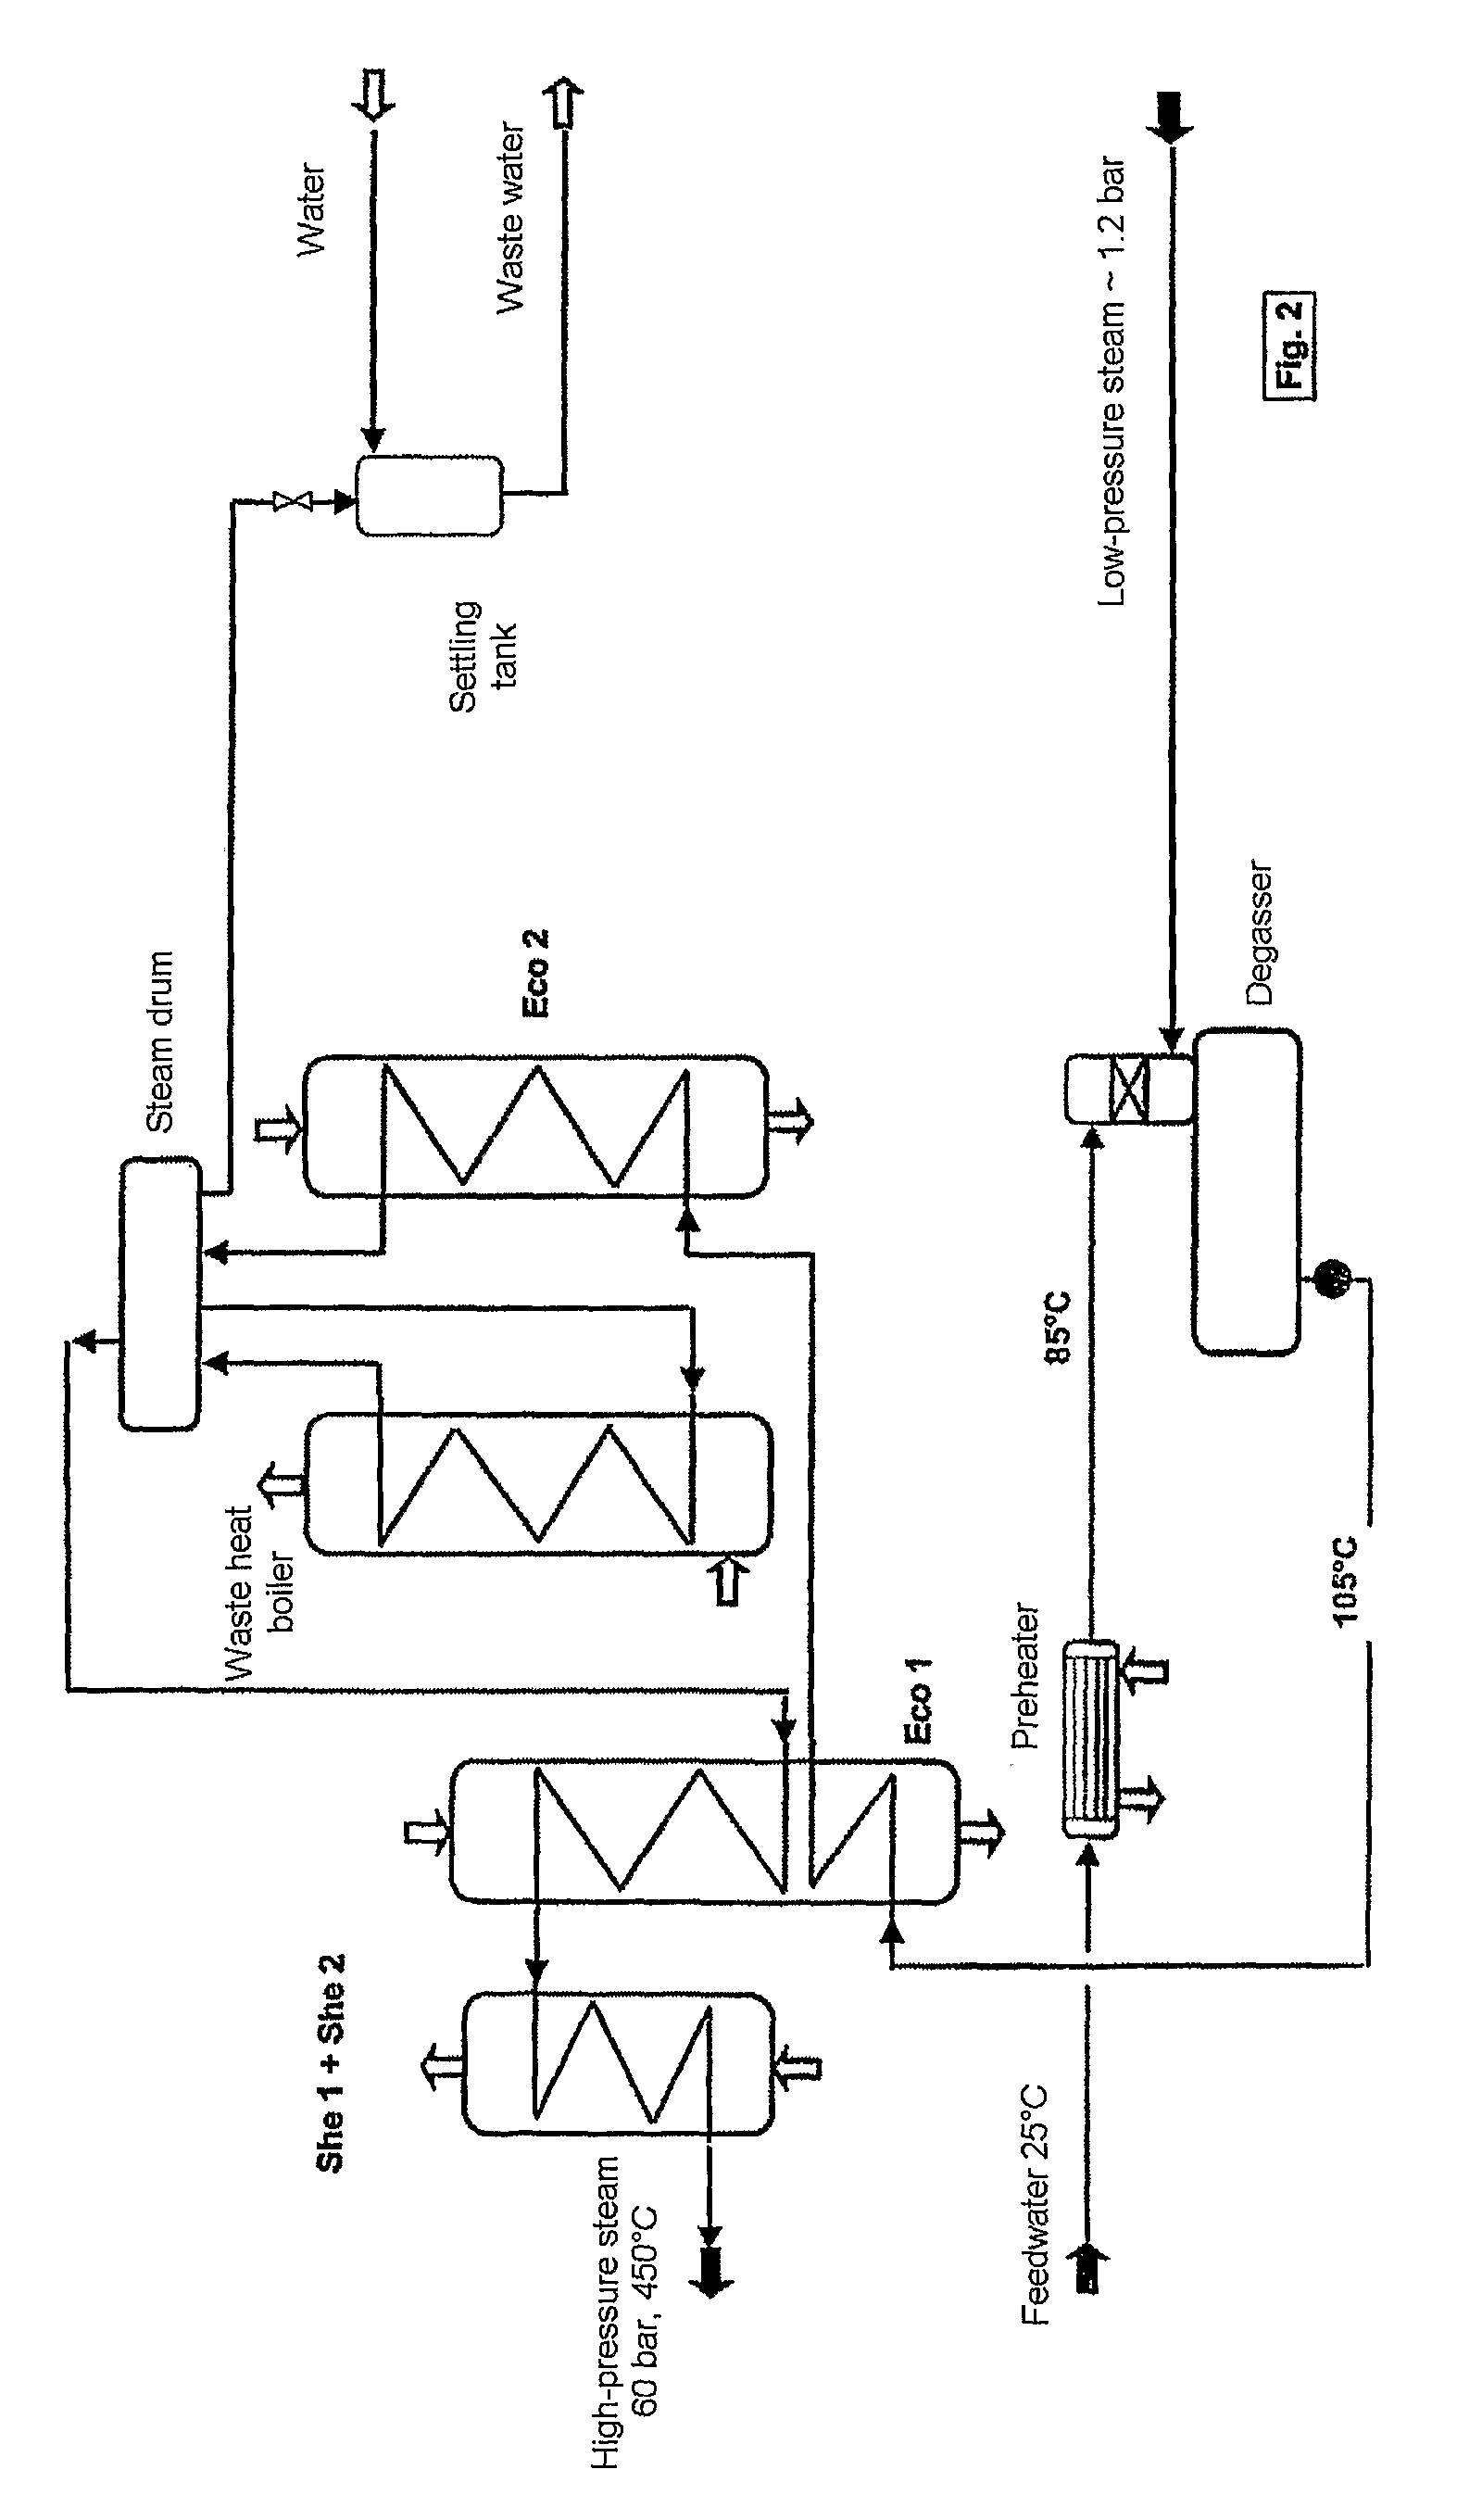 Process and plant for the production of sulphuric acid